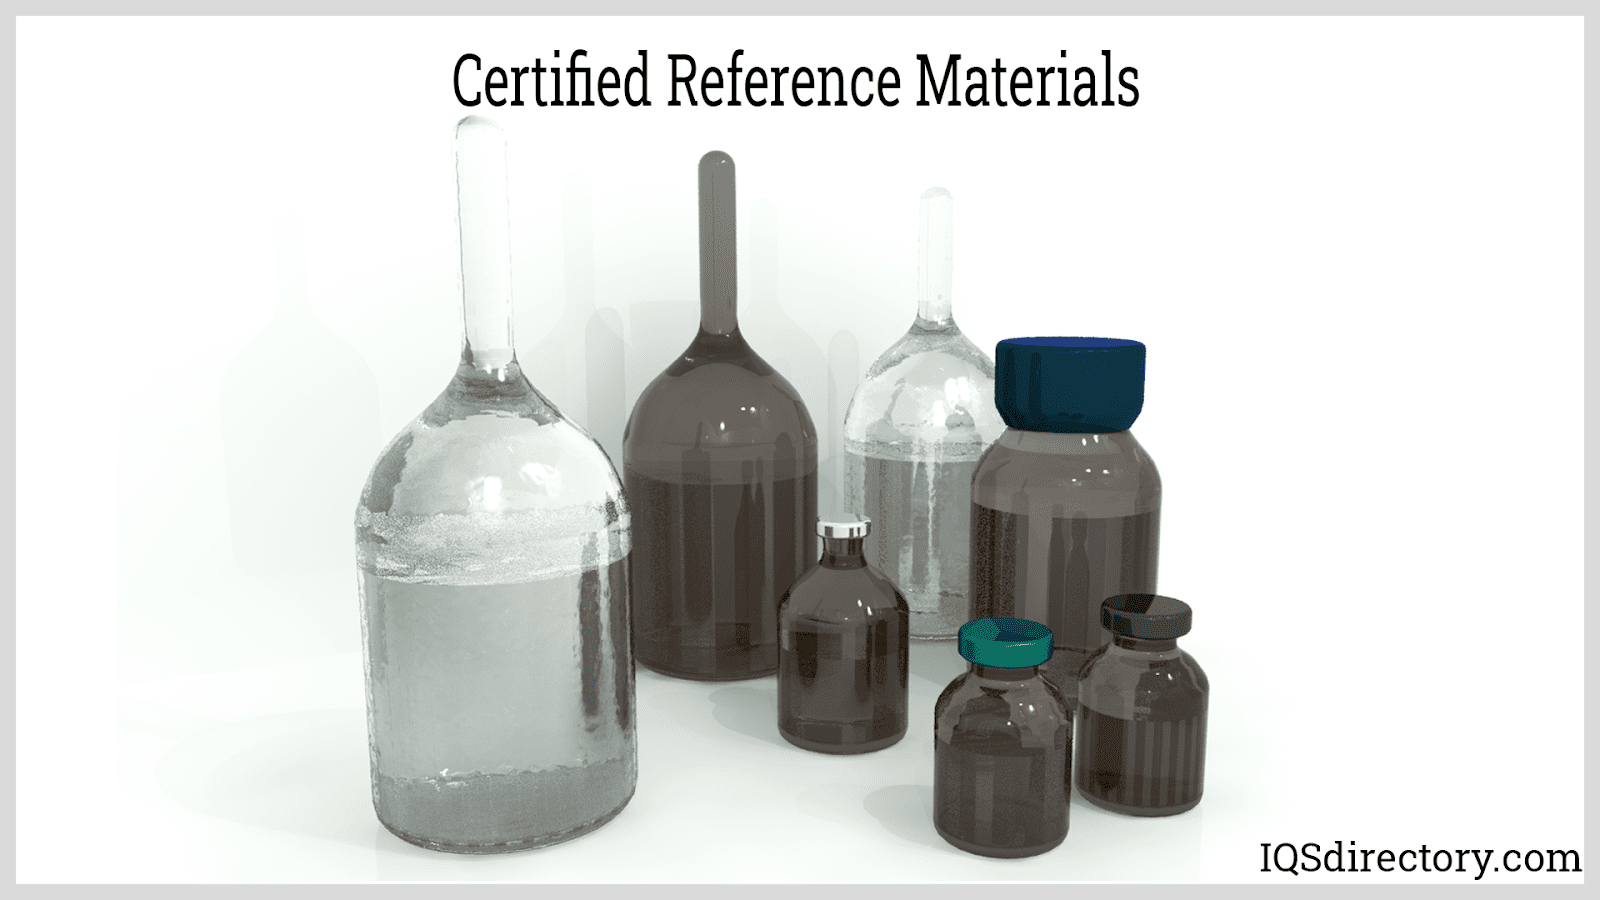 Certified Reference Materials